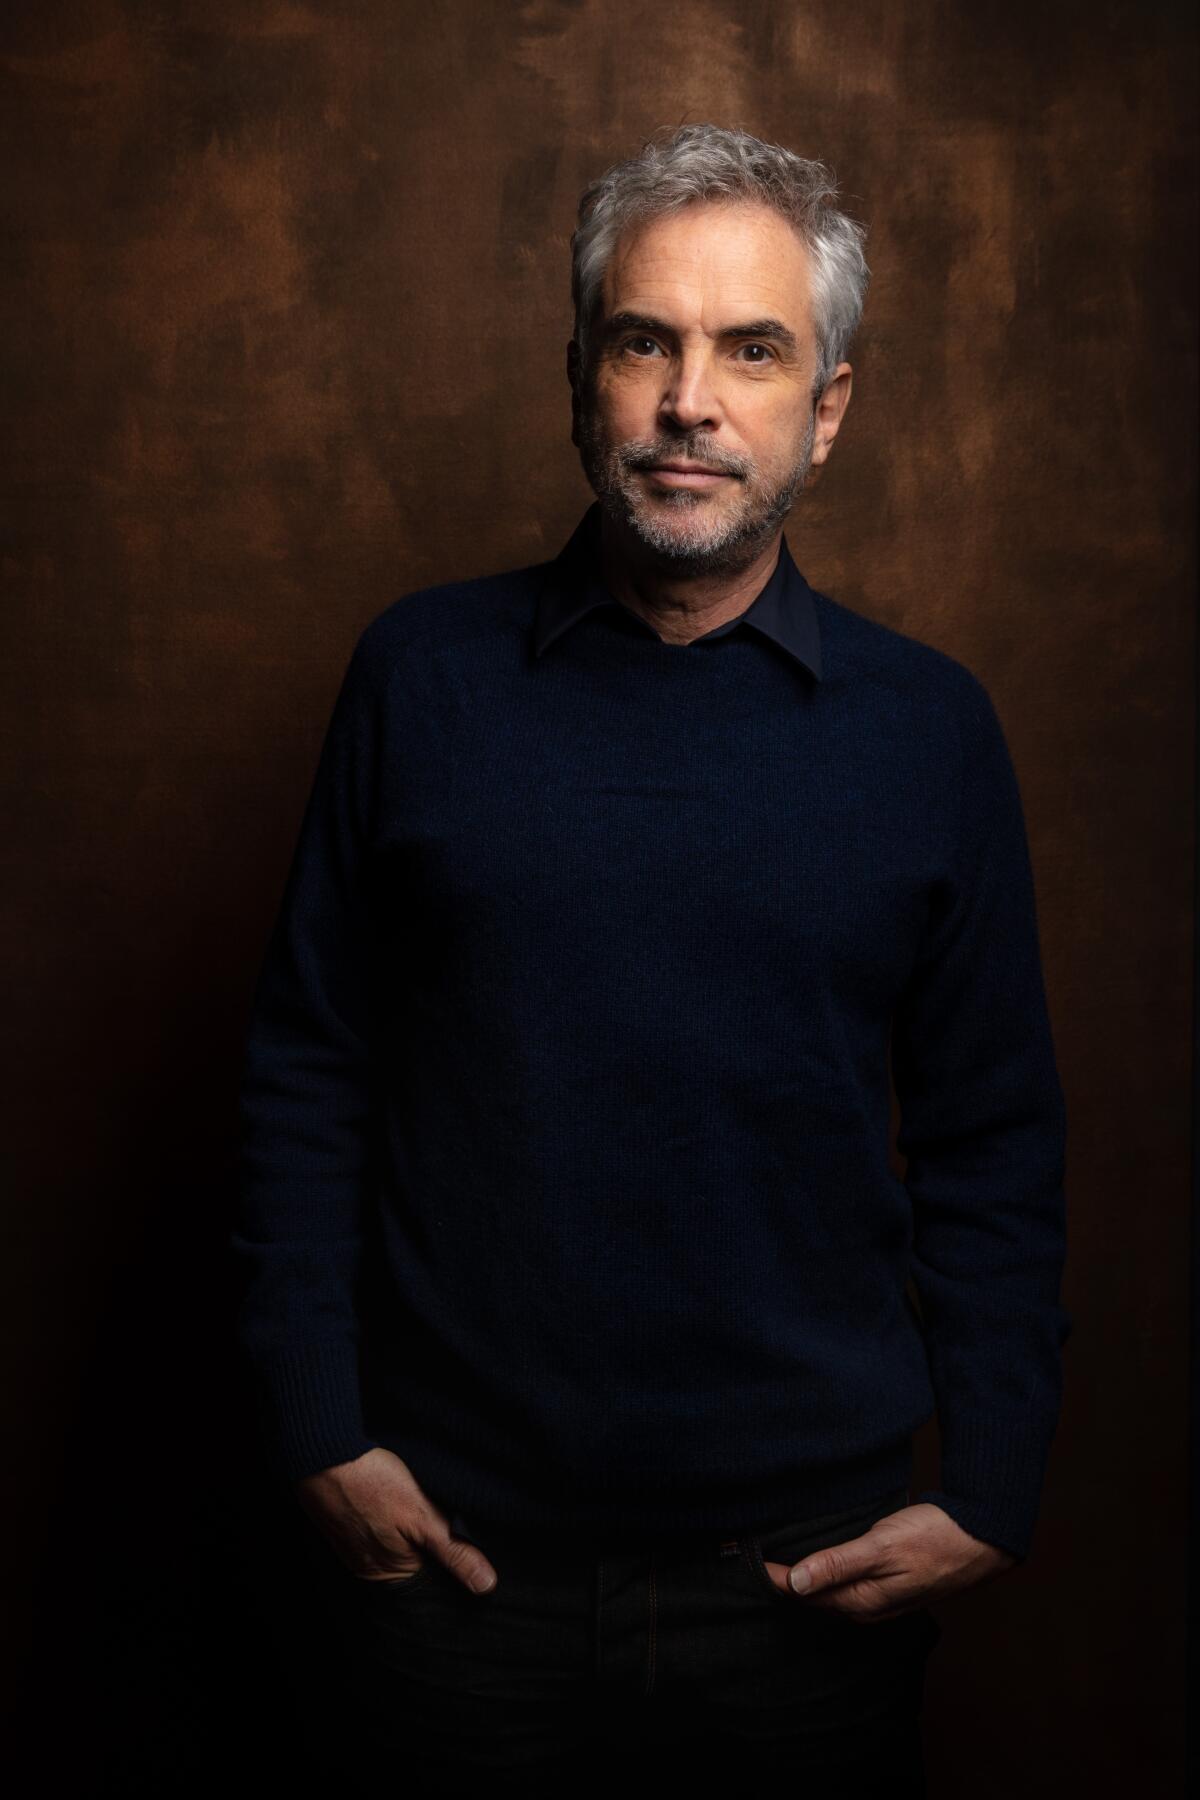 A portrait of filmmaker Alfonso Cuarón standing with his hands in his pocket.